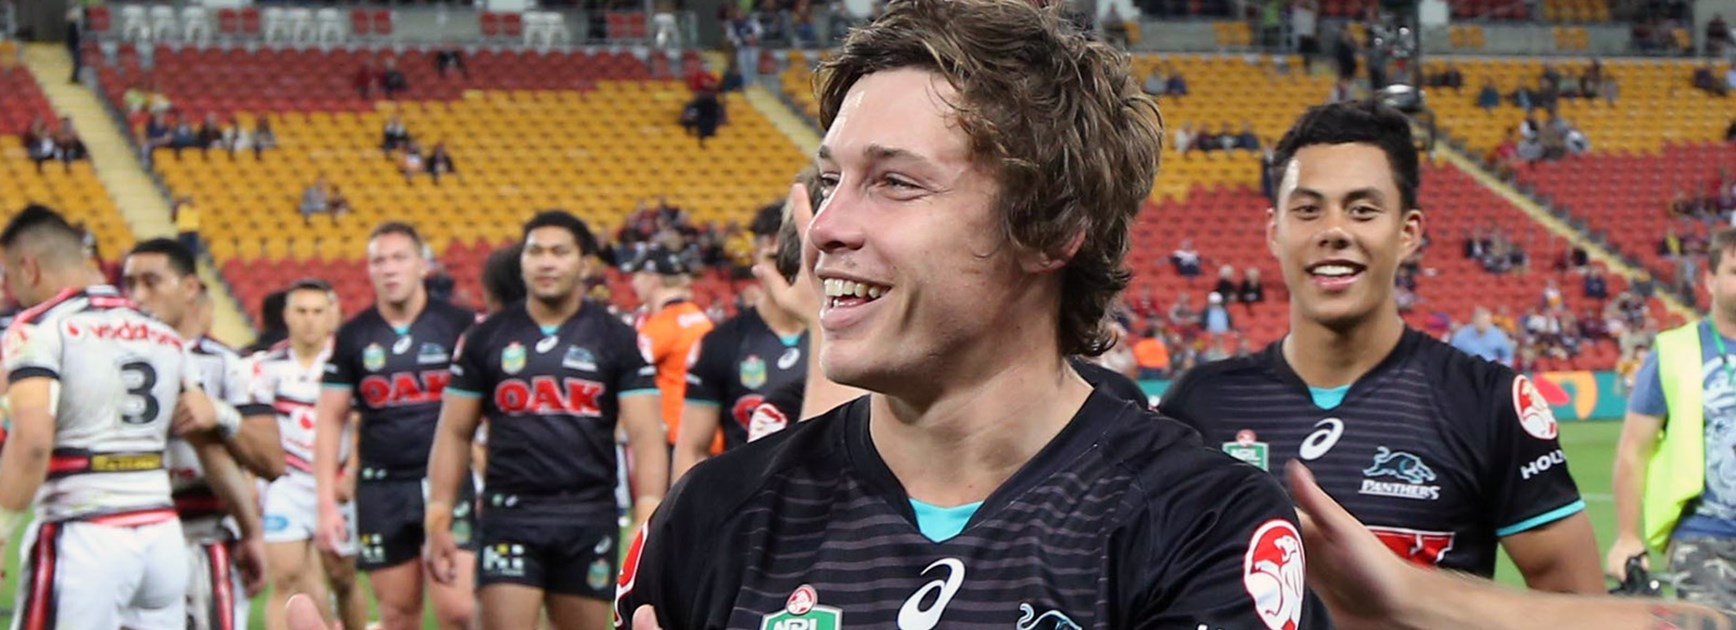 The Panthers NYC side enjoyed a massive preliminary final win over the Warriors.